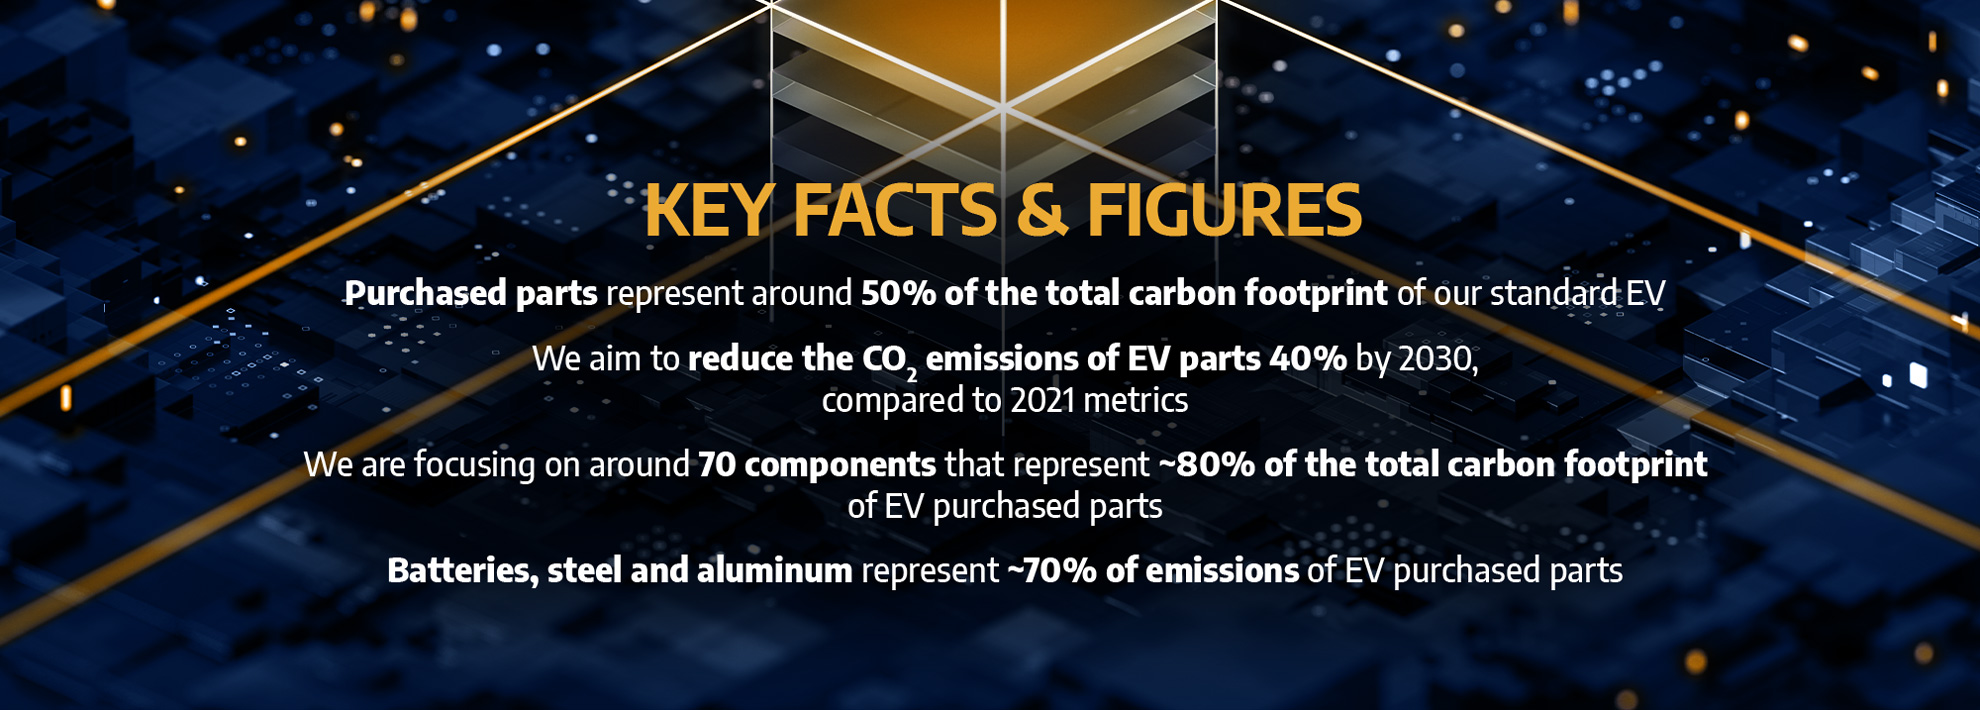 KEY FACTS & FIGURES. Purchased parts represent around 50% of the total carbon footprint of our standard EV. We aim to reduce the CO2 emissions of EV parts 40% by 2030, compared to 2021 metrics. We are focusing on around 70 components that represent approx. 80% of the total carbon footprint of EV purchased parts. Batteries, steel and aluminum represent approx. 70% of emissions of EV purchased parts.